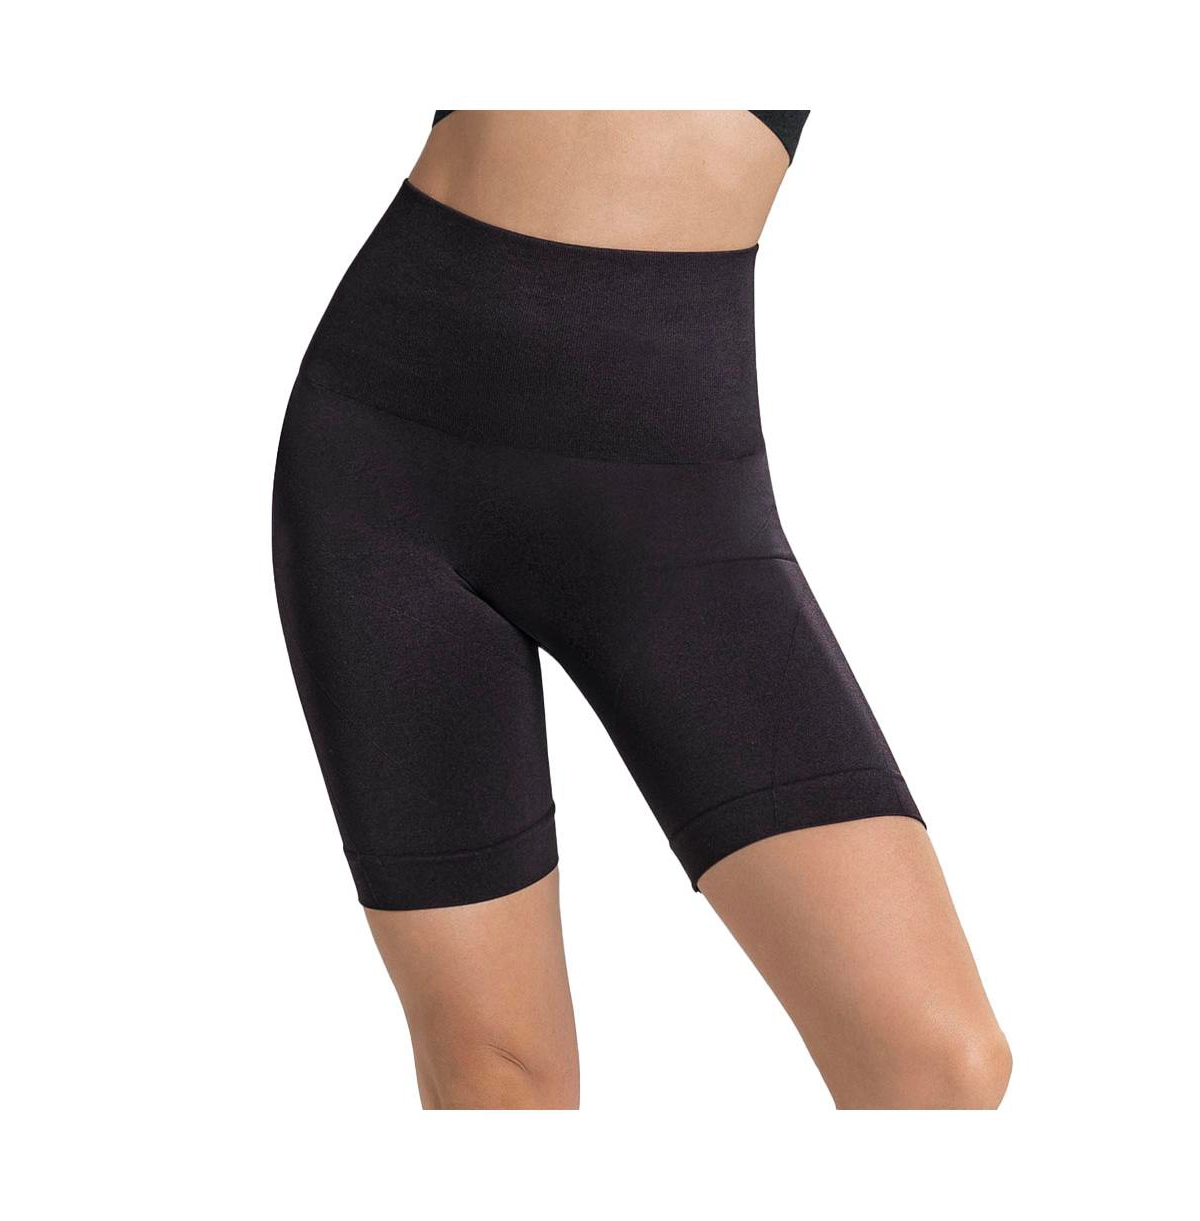 Smoothing high active short for Women - Black